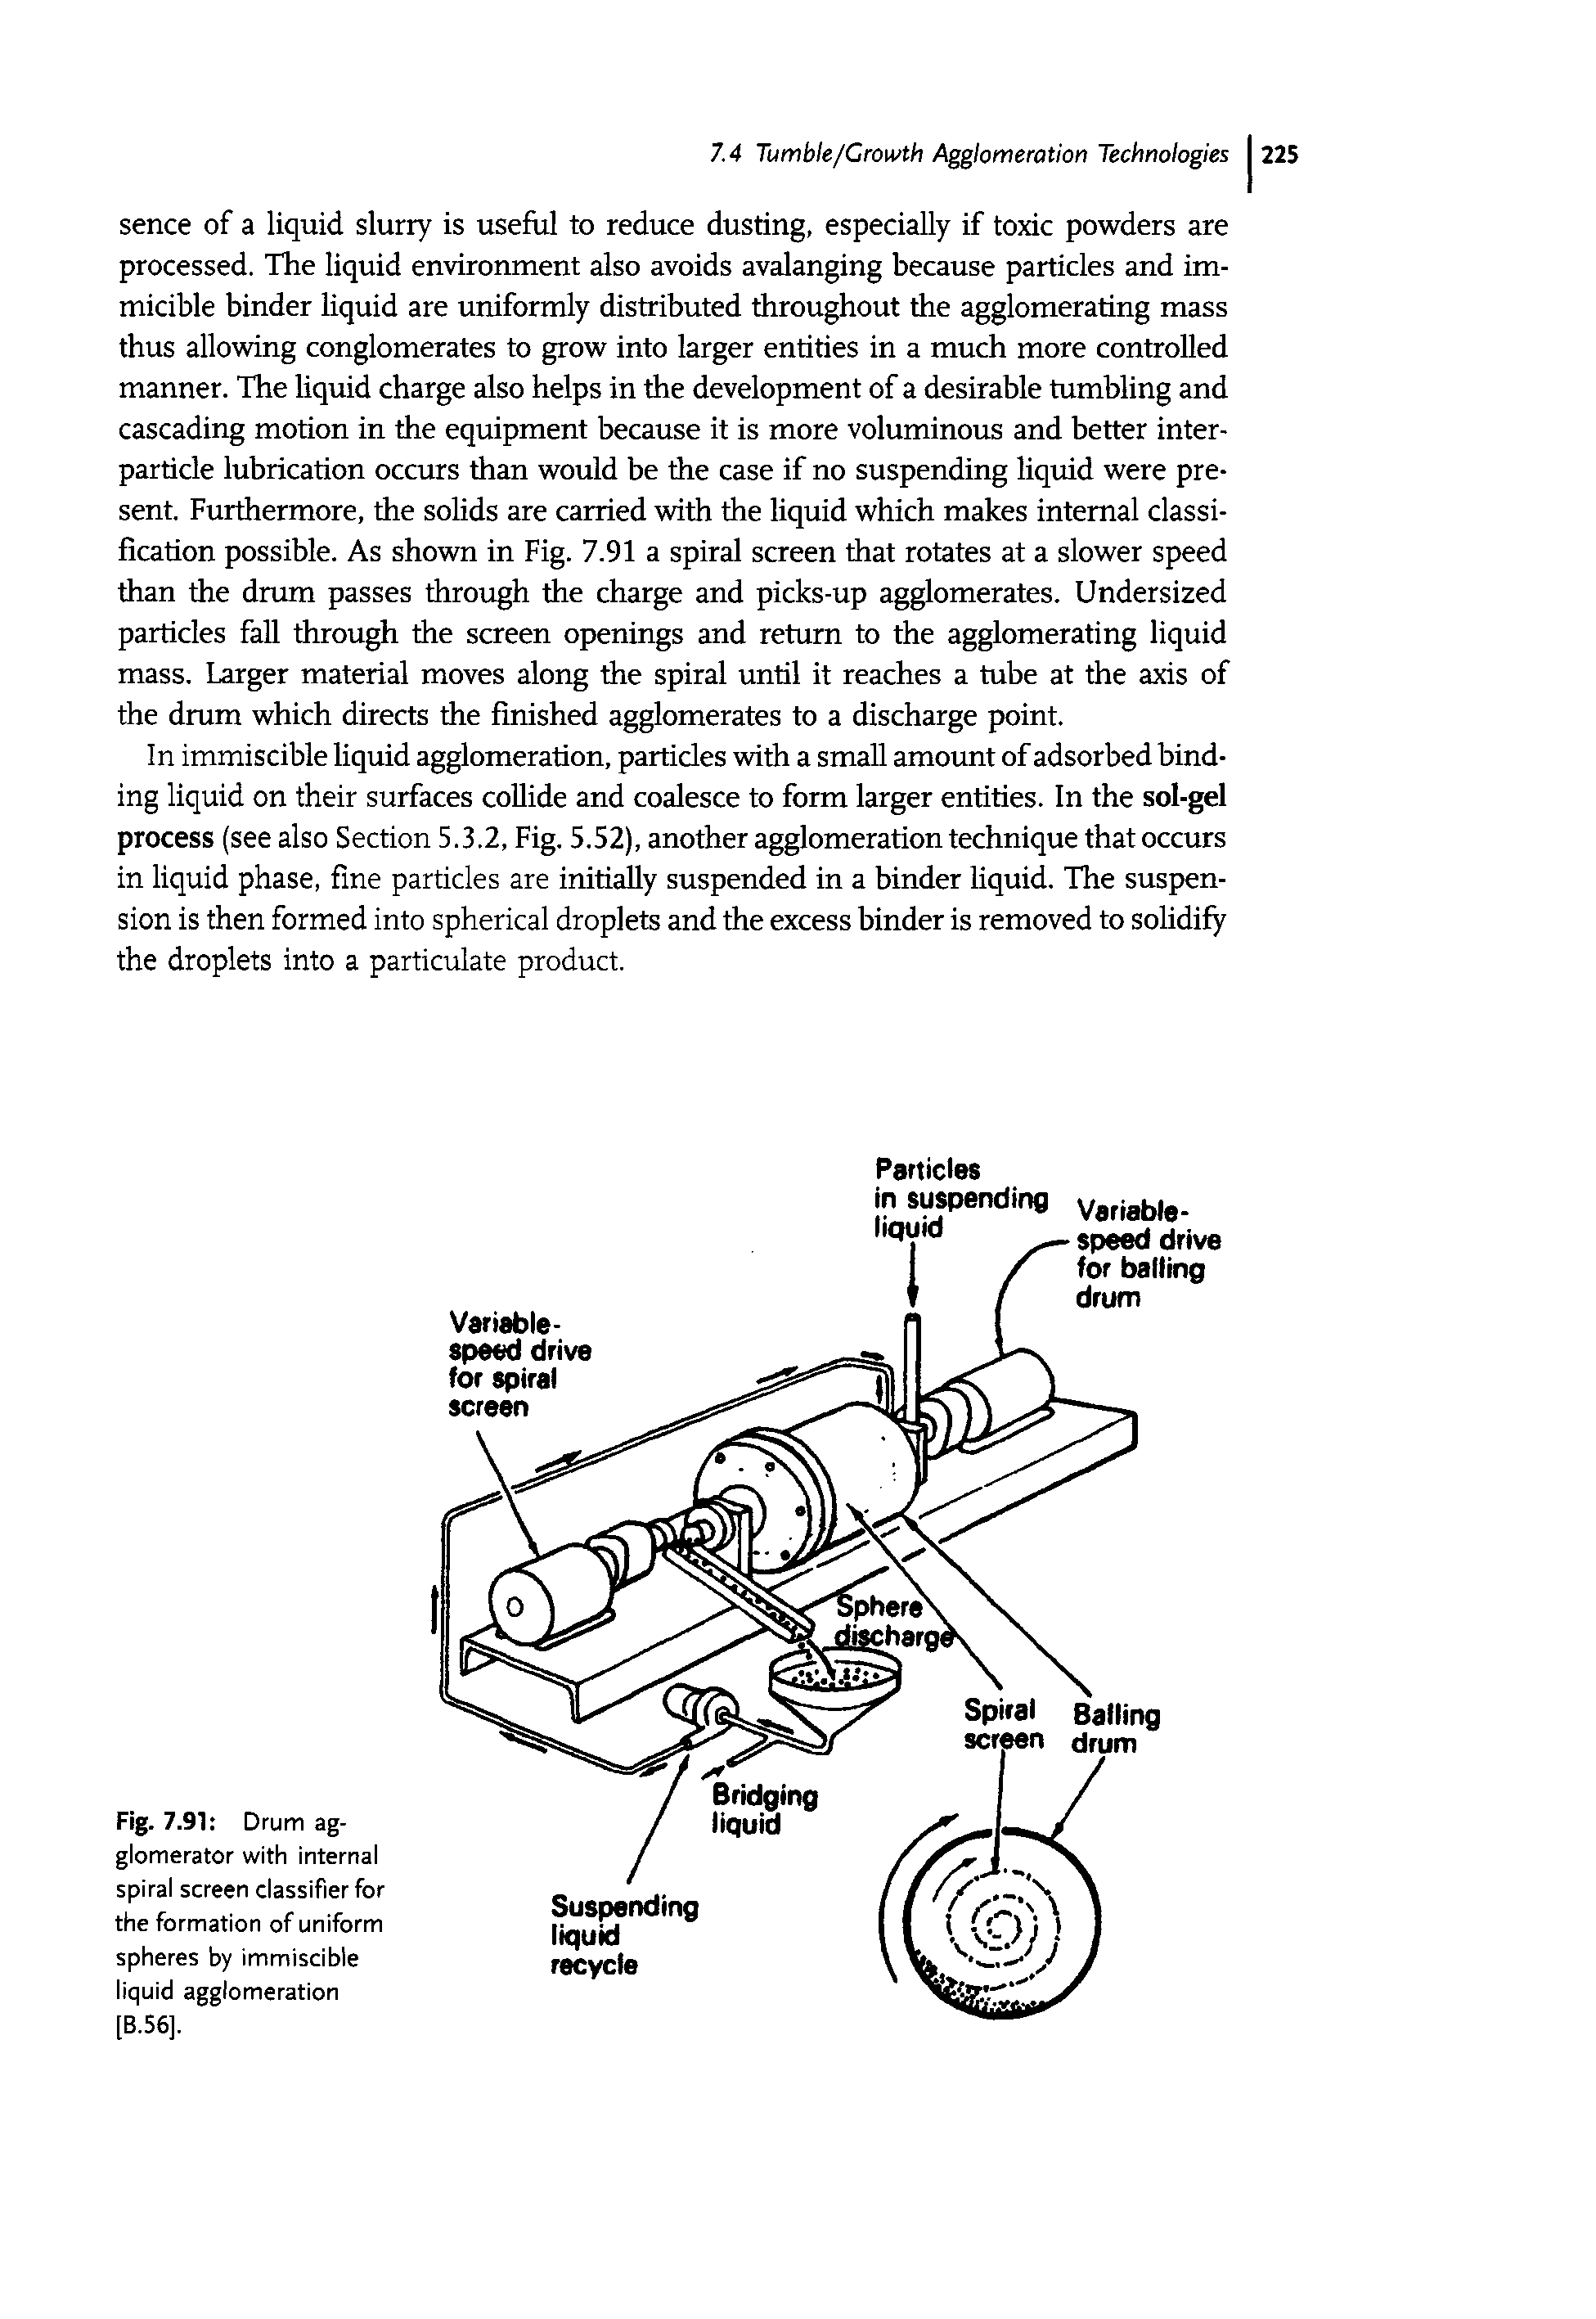 Fig. 7.91 Drum ag-glomerator with internal spiral screen classifier for the formation of uniform spheres by immiscible liquid agglomeration [B.56].